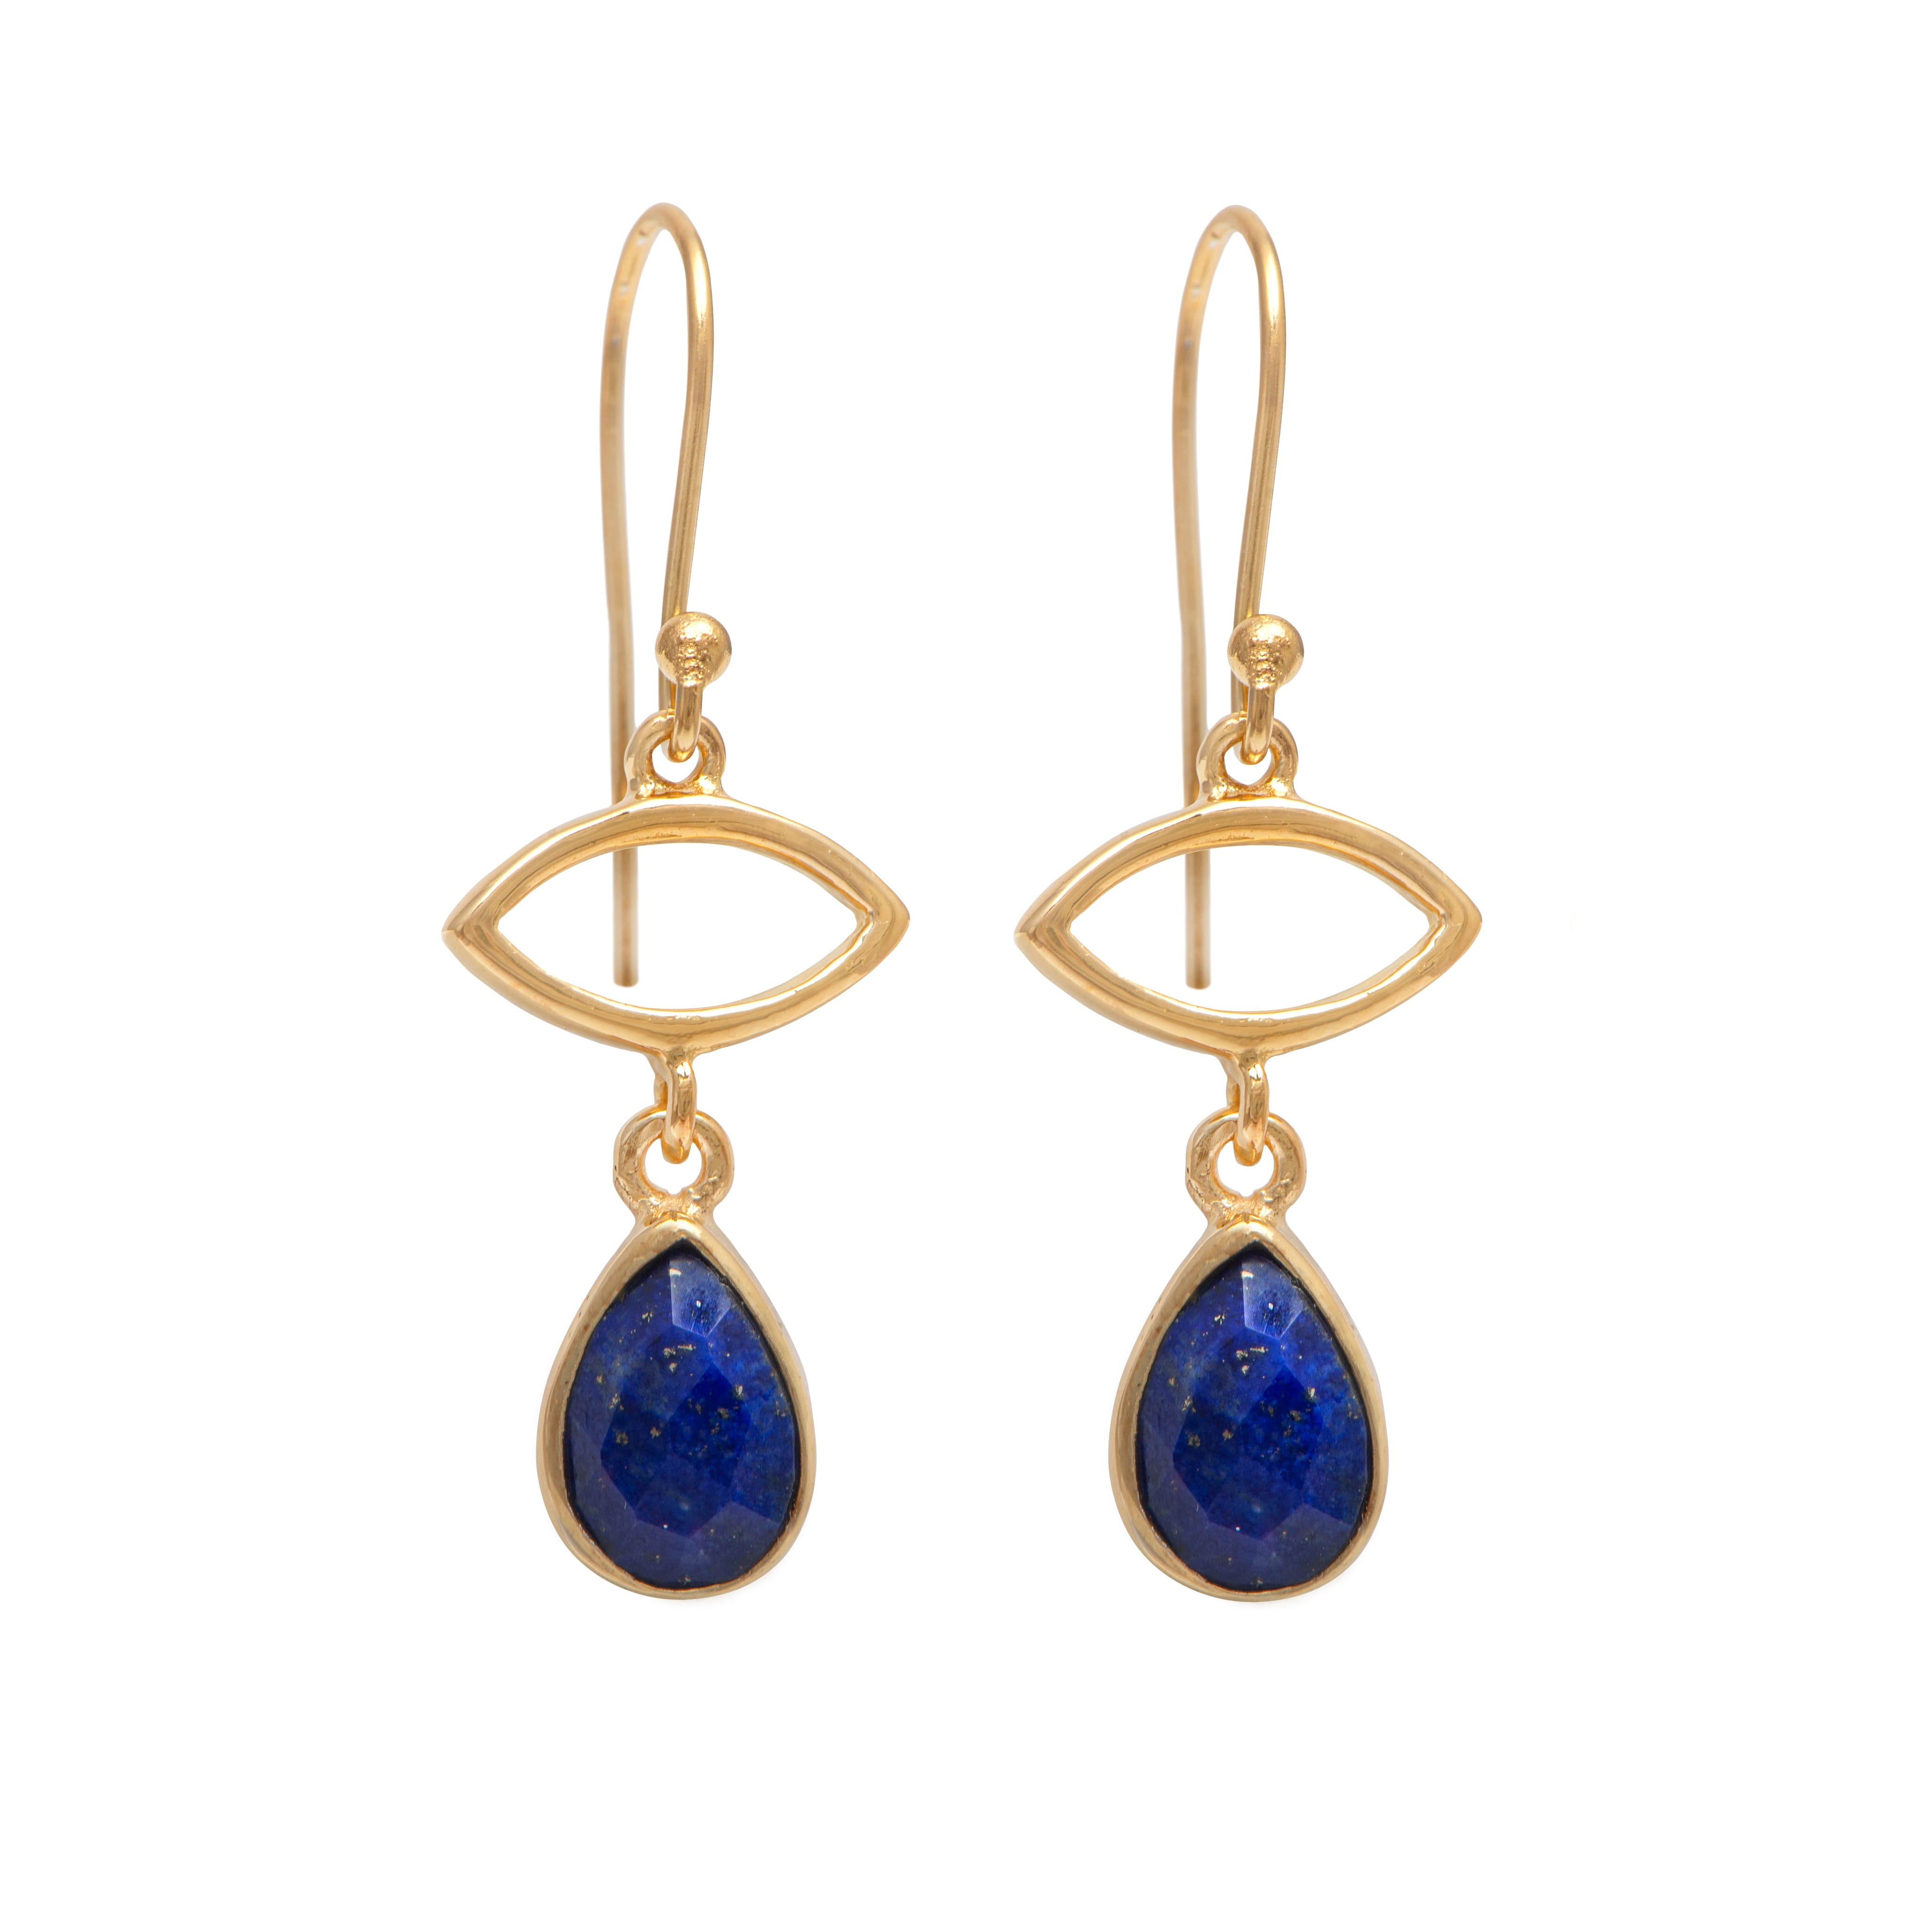 Gold Plated Drop Earrings with Lapis Lazuli Gemstone